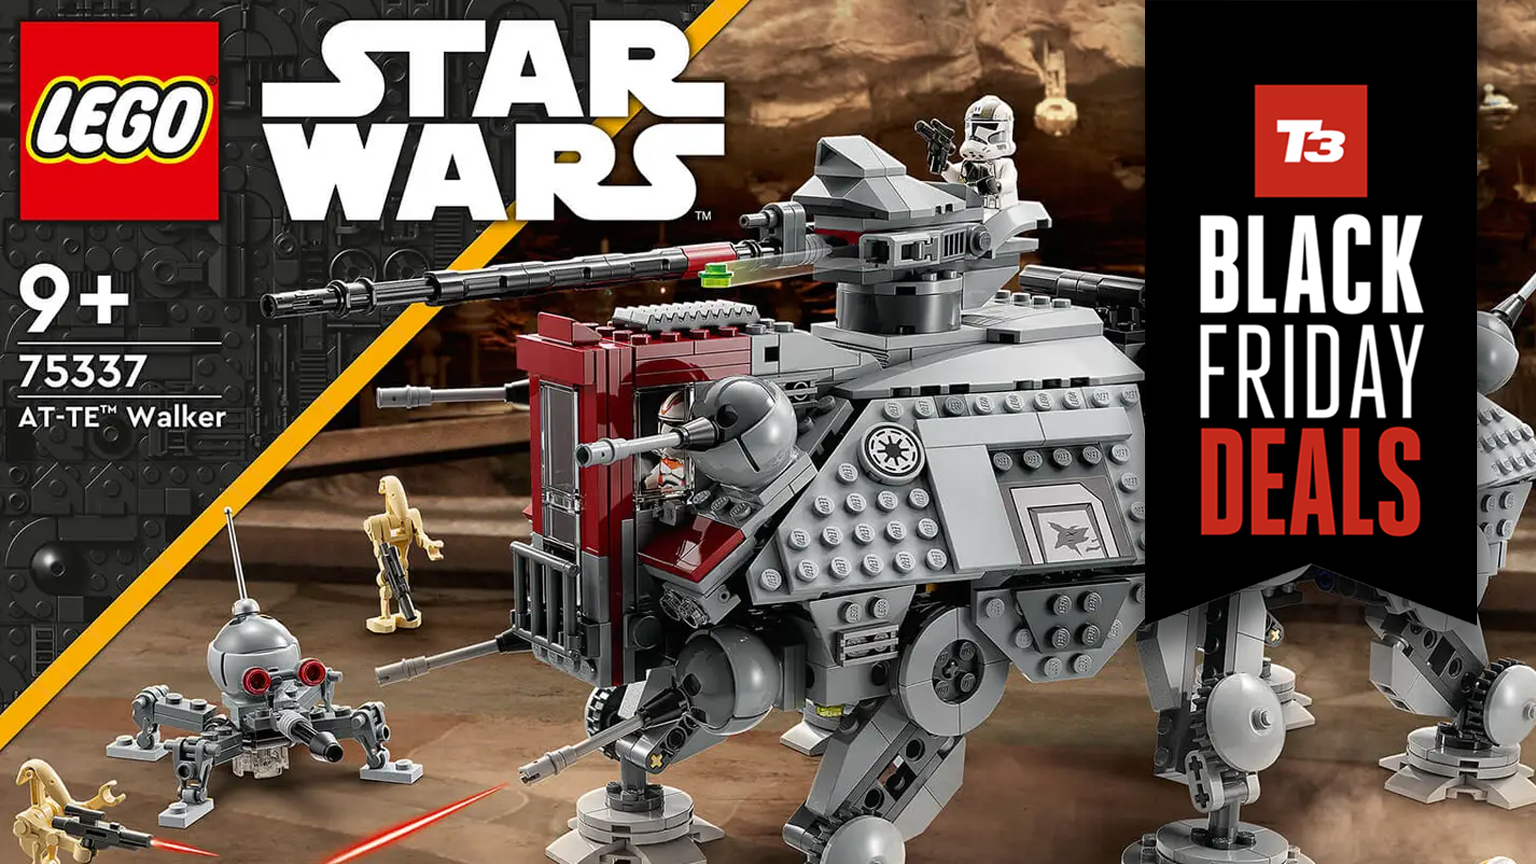 Lego Star Wars AT-TE Walker remains at low price – and I want one